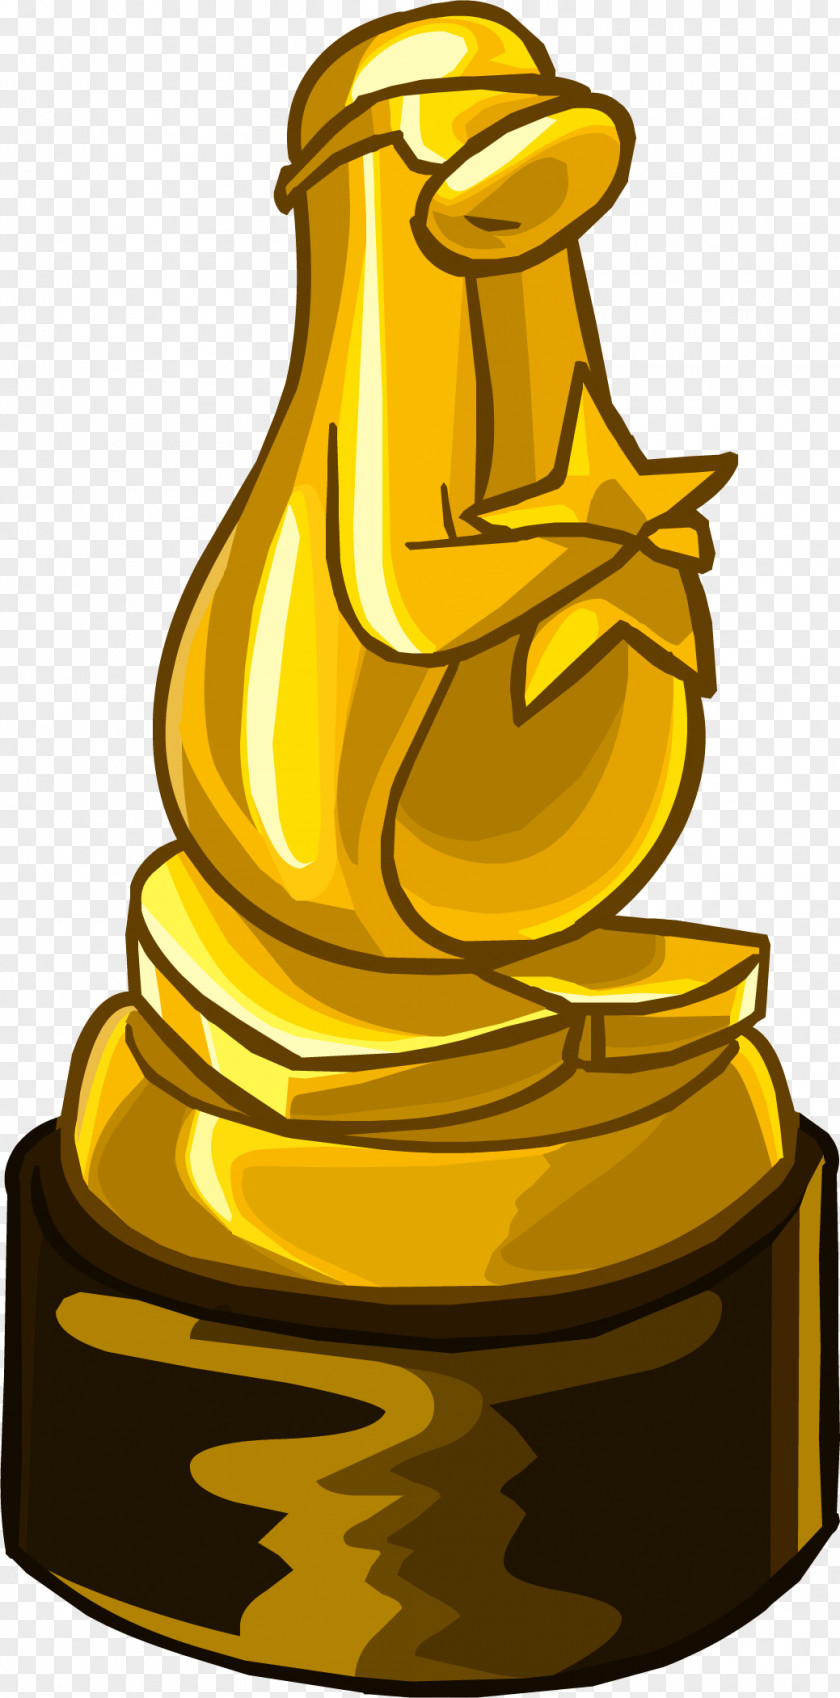 Cookie Club Penguin Silver Award Gold PNG